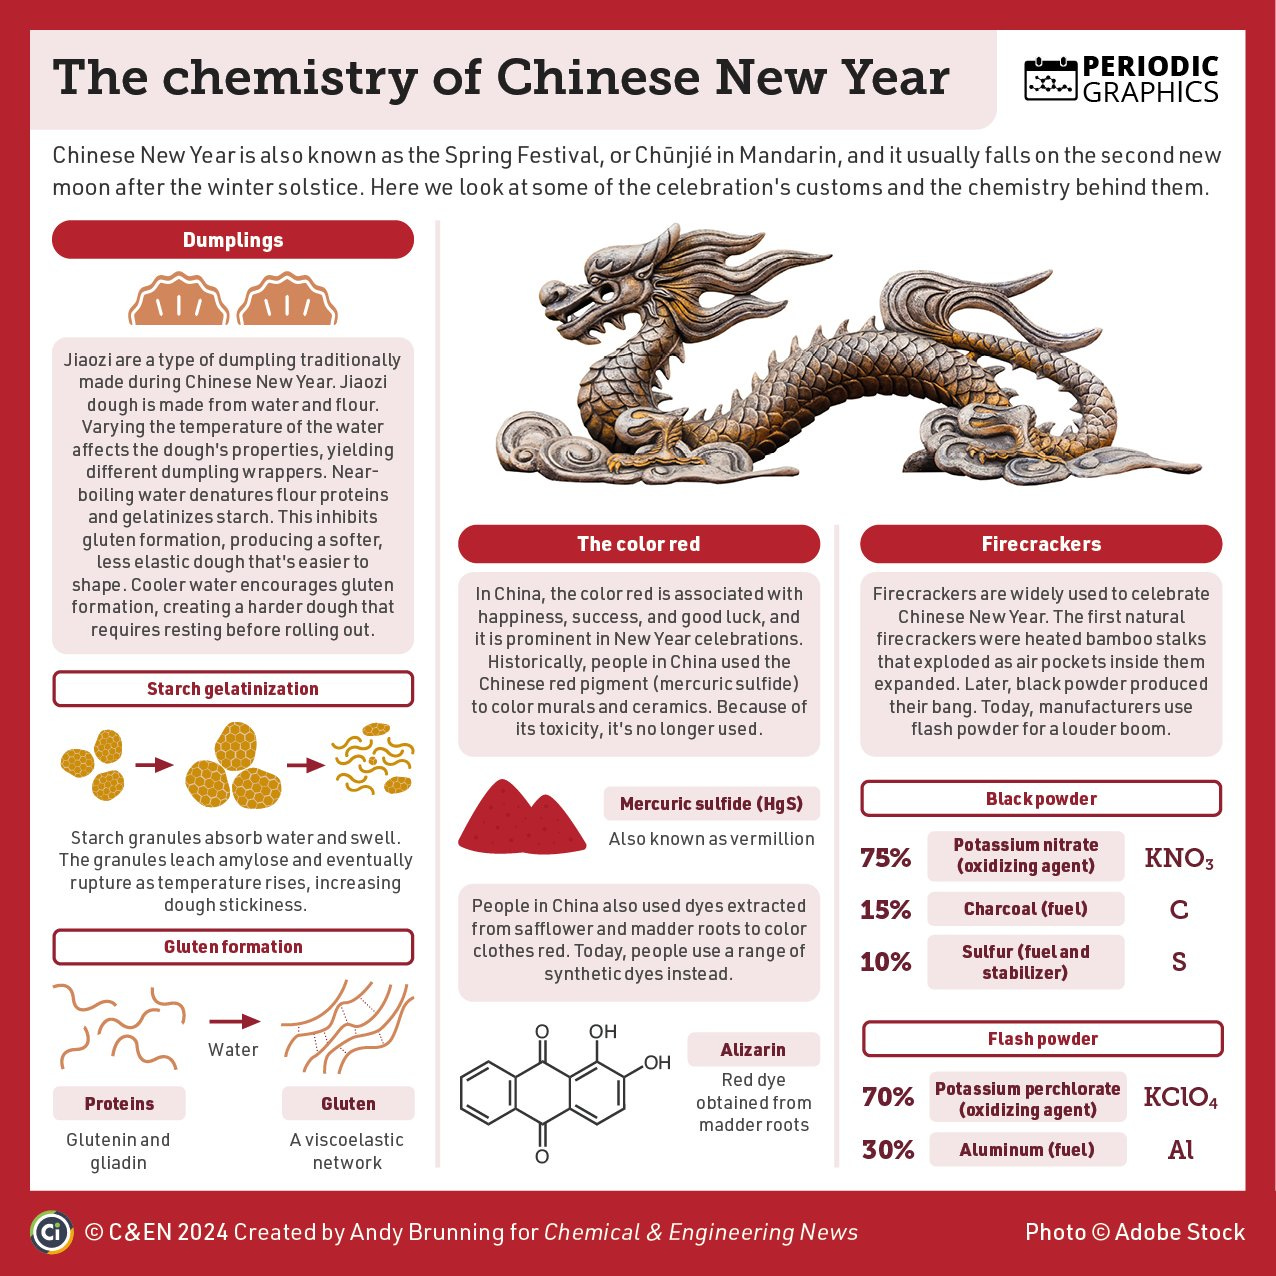 An infographic that examines the customs of Chinese New Year and the chemistry behind them.


Jiaozi is a dumpling, made from water and flour, traditionally made during Chinese New Year. Varying water temperature affects the dough's properties. Near-boiling water denatures flour proteins and gelatinizes starch. This inhibits gluten formation, producing a softer, less elastic dough that's easier to shape.


In China, red is associated with happiness, success, and good luck, and it is prominent in New Year celebrations. The Chinese red pigment (mercuric sulfide) was used to color murals and ceramics. Because of its toxicity, it's no longer used. People in China also used dyes from safflower and madder roots to color clothes red. 

Firecrackers are widely used to celebrate Chinese New Year. The first natural firecrackers were heated bamboo stalks that exploded as air pockets inside them expanded. Later, black powder produced their bang. Today, manufacturers use flash powder instead.